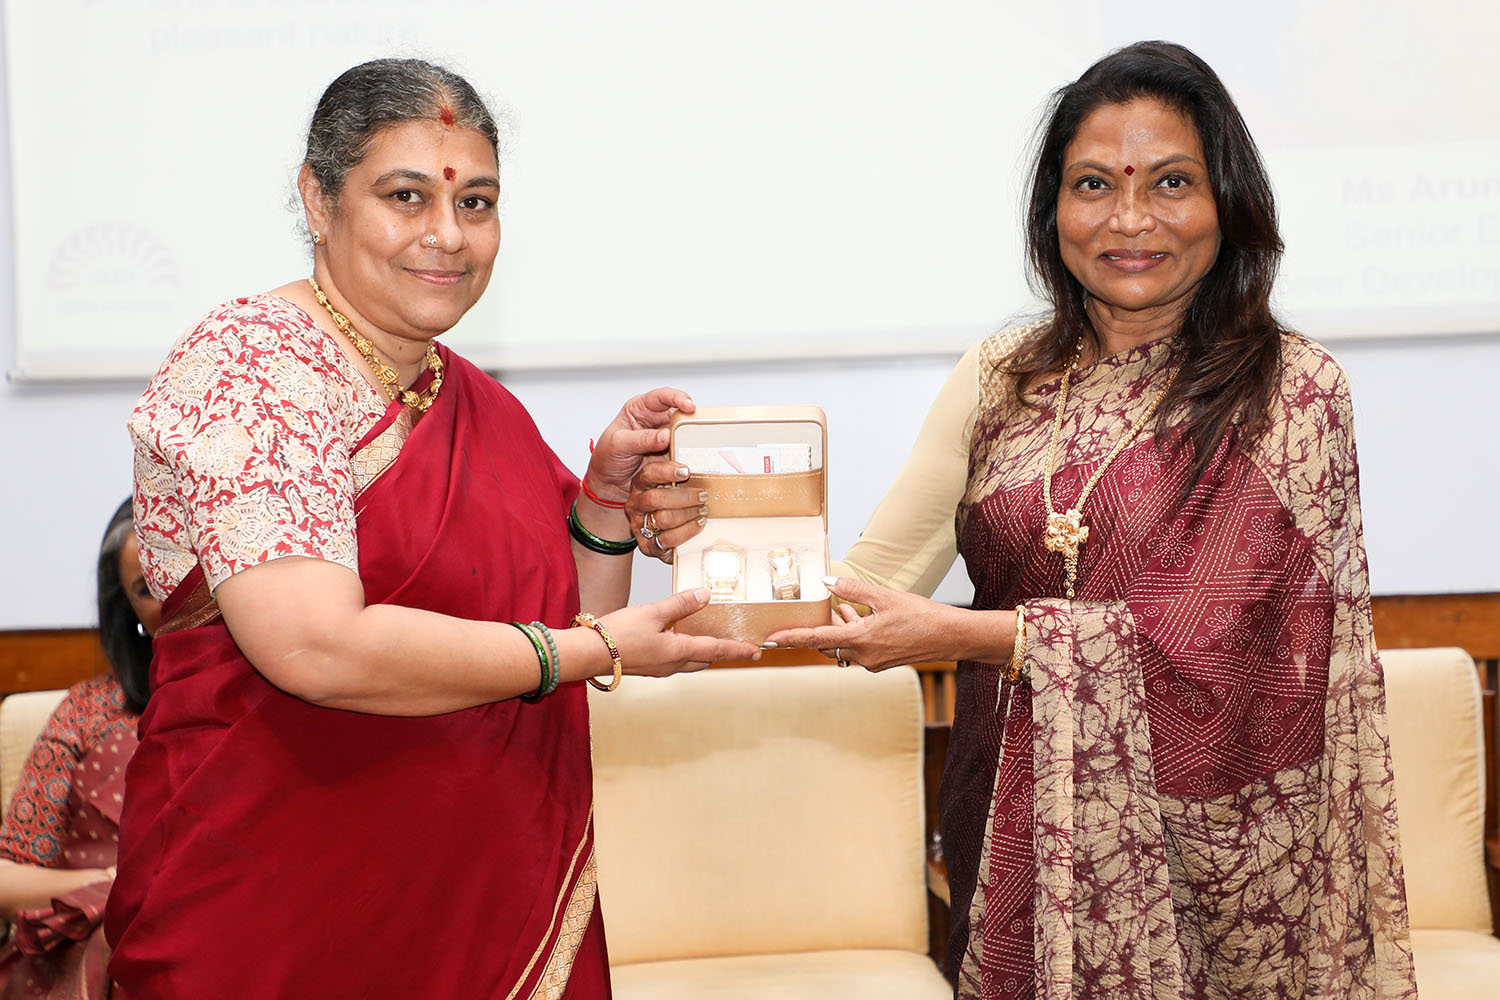 Ms Aruna Jaipal, Senior Executive, Career Development Services Office, receives the award for 20 years of service from Ms. Kalpana Saroj, Member of the Board of Governors, IIMB, during the institute’s 49th Foundation Day celebrations.